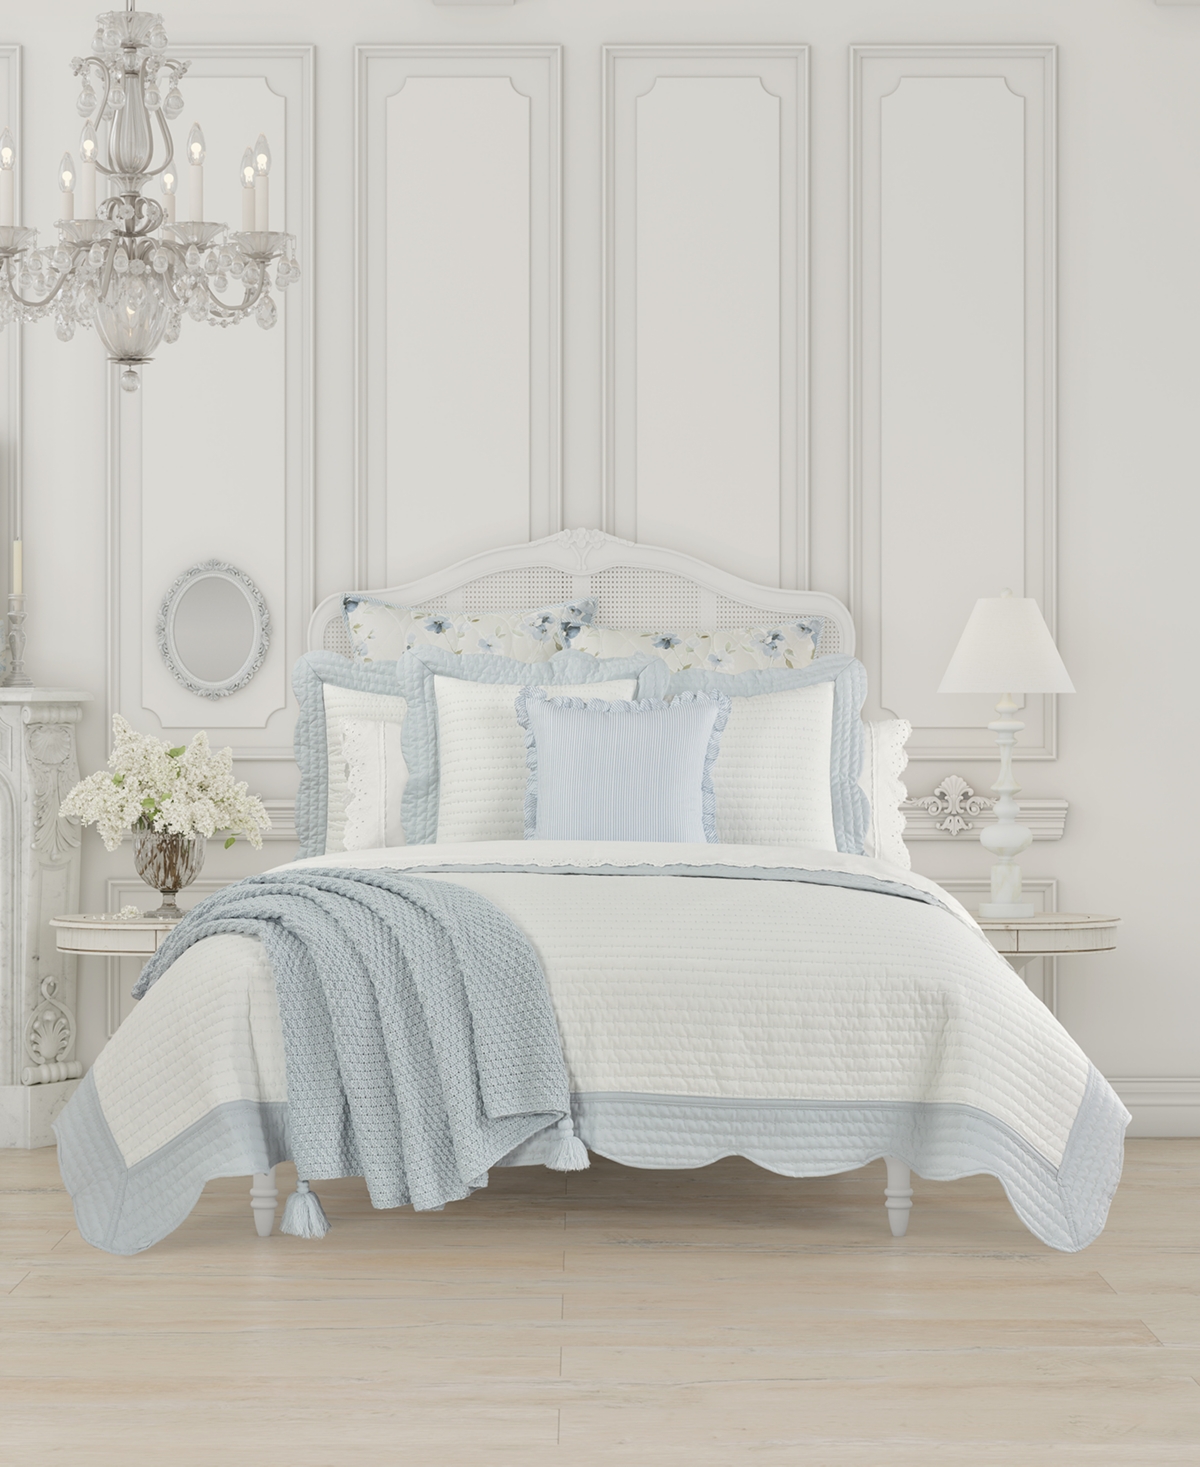 Piper & Wright Amherst Quilt, Full/queen In French Blue